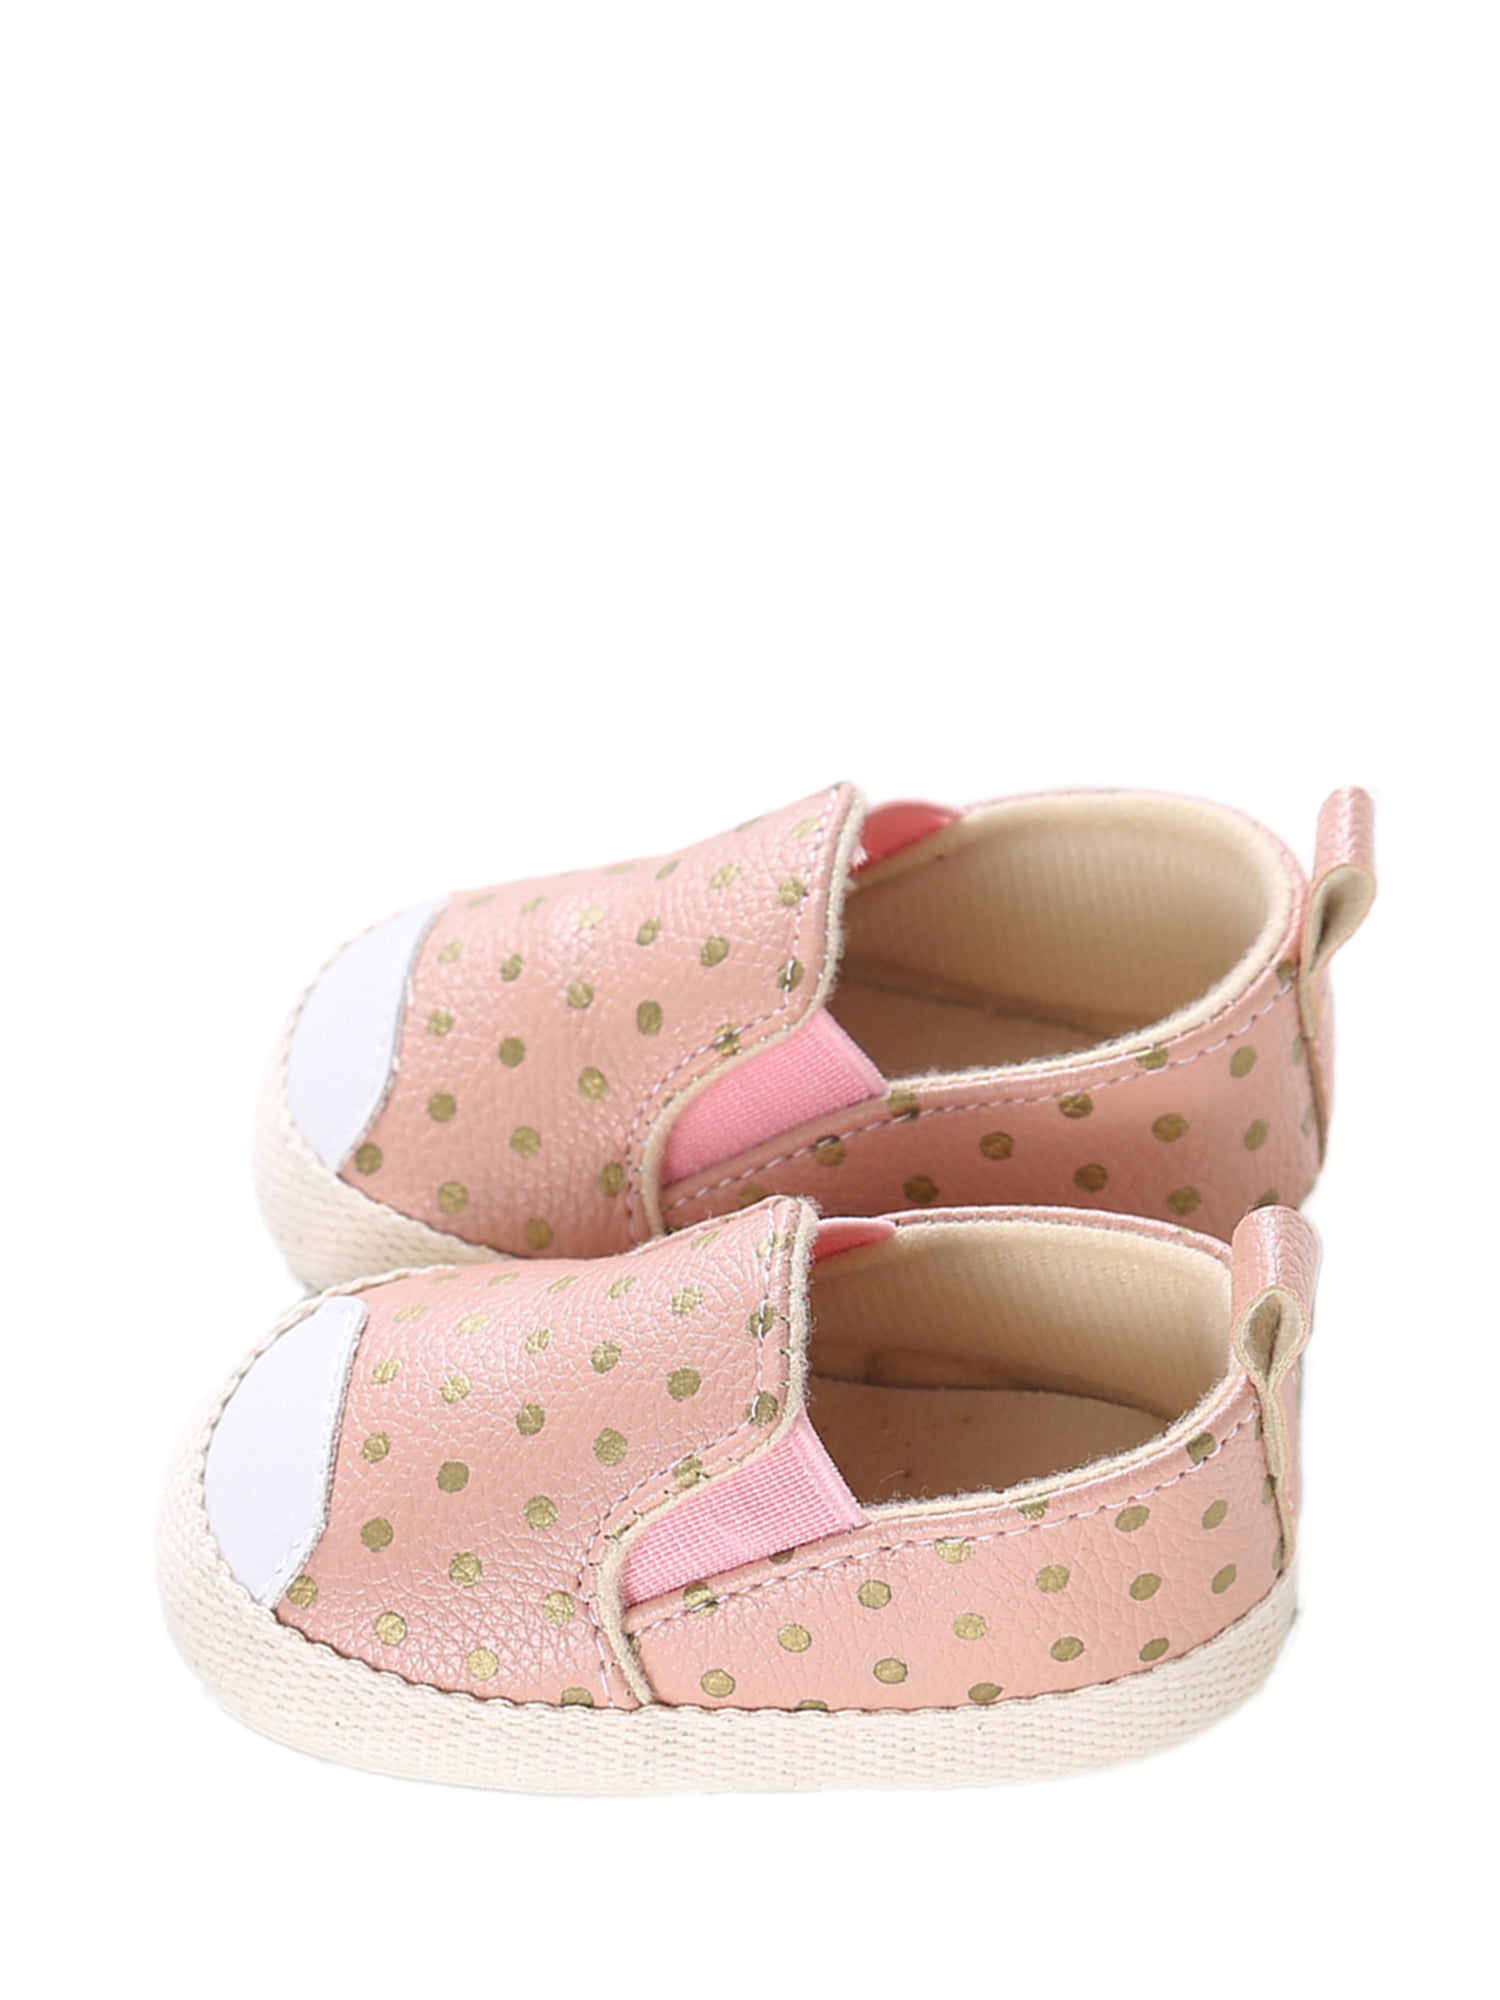 NEW Baby Girl Red Pink Polka Dot Mary Jane Flower Crib Shoes 0-6 6-12 12-18 M 